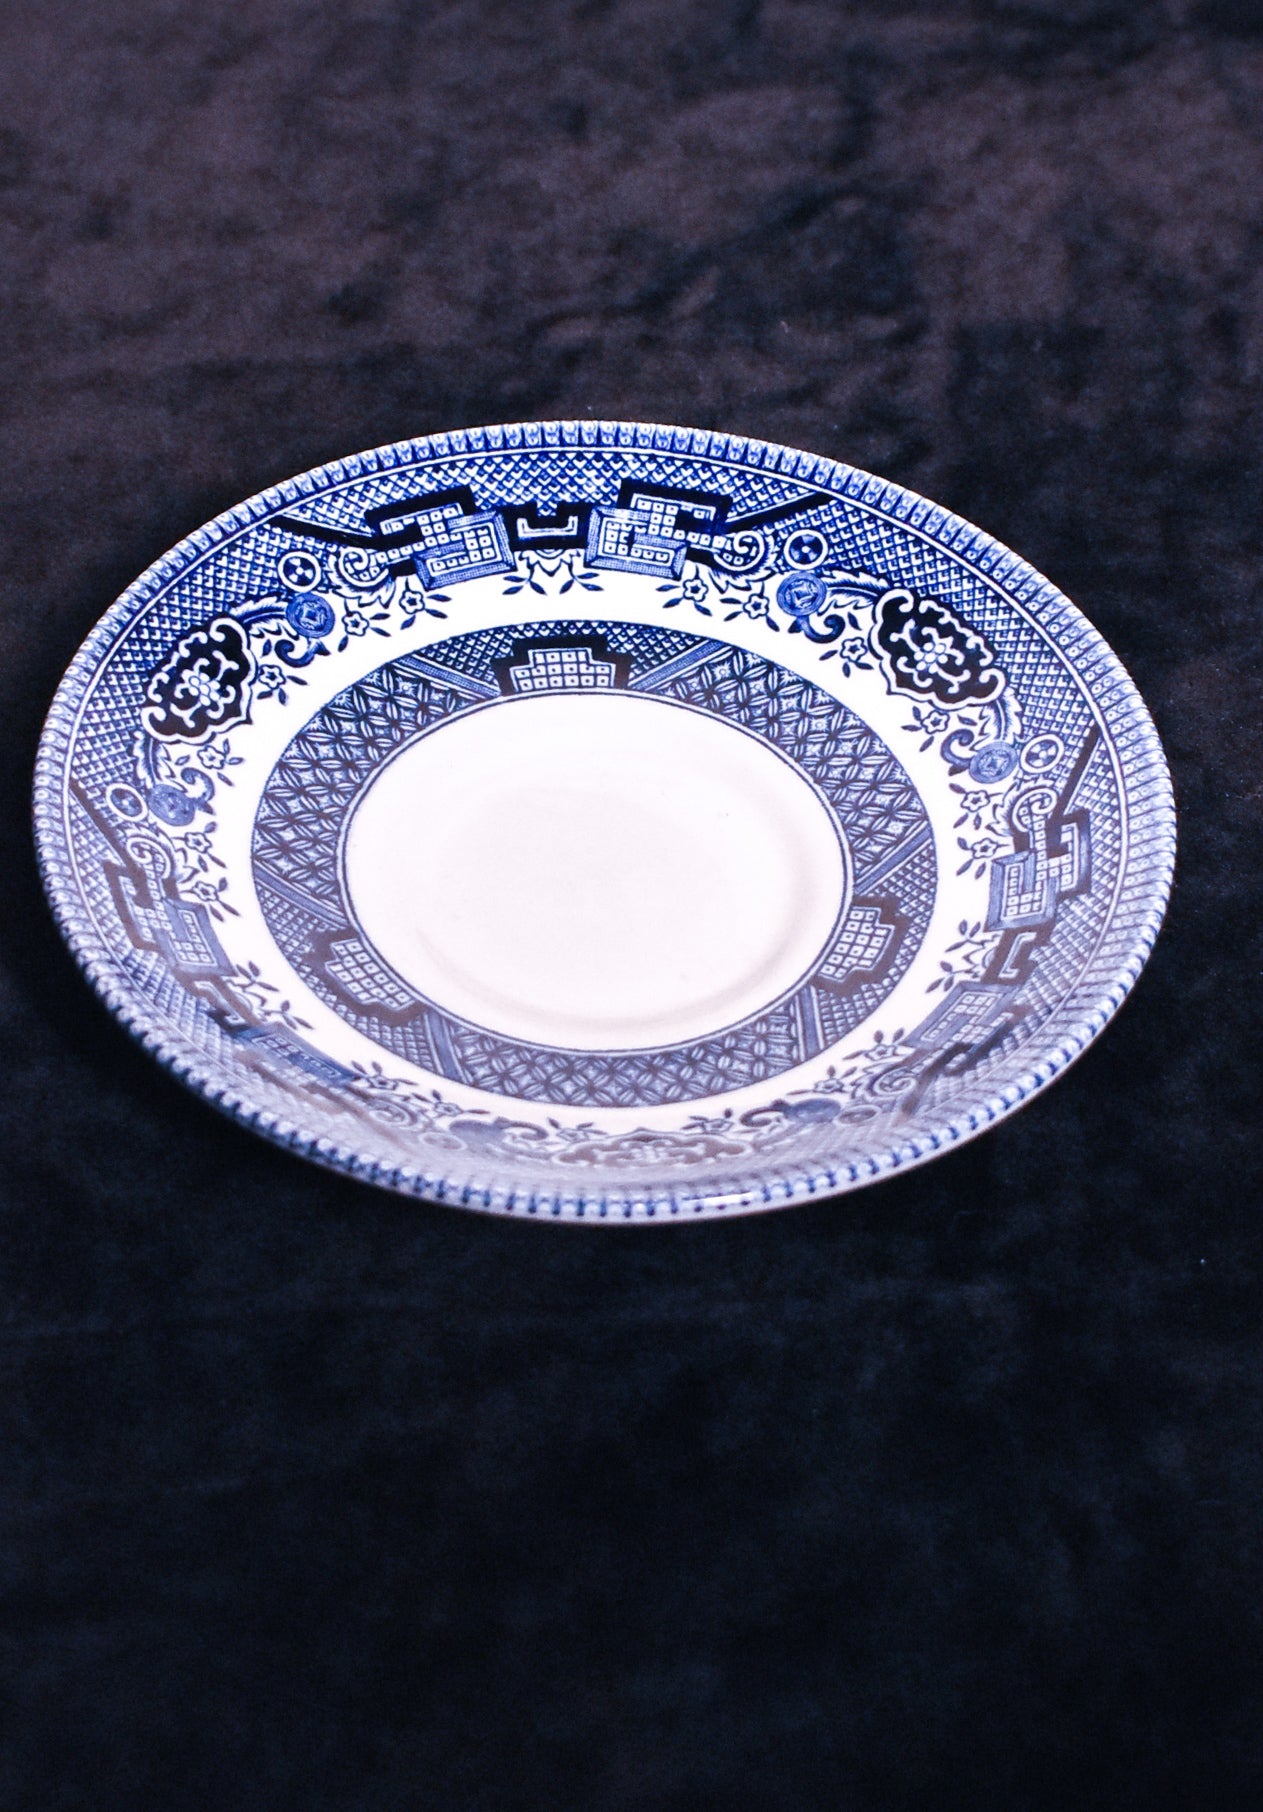 Blue and white cups and saucer. Willow pattern